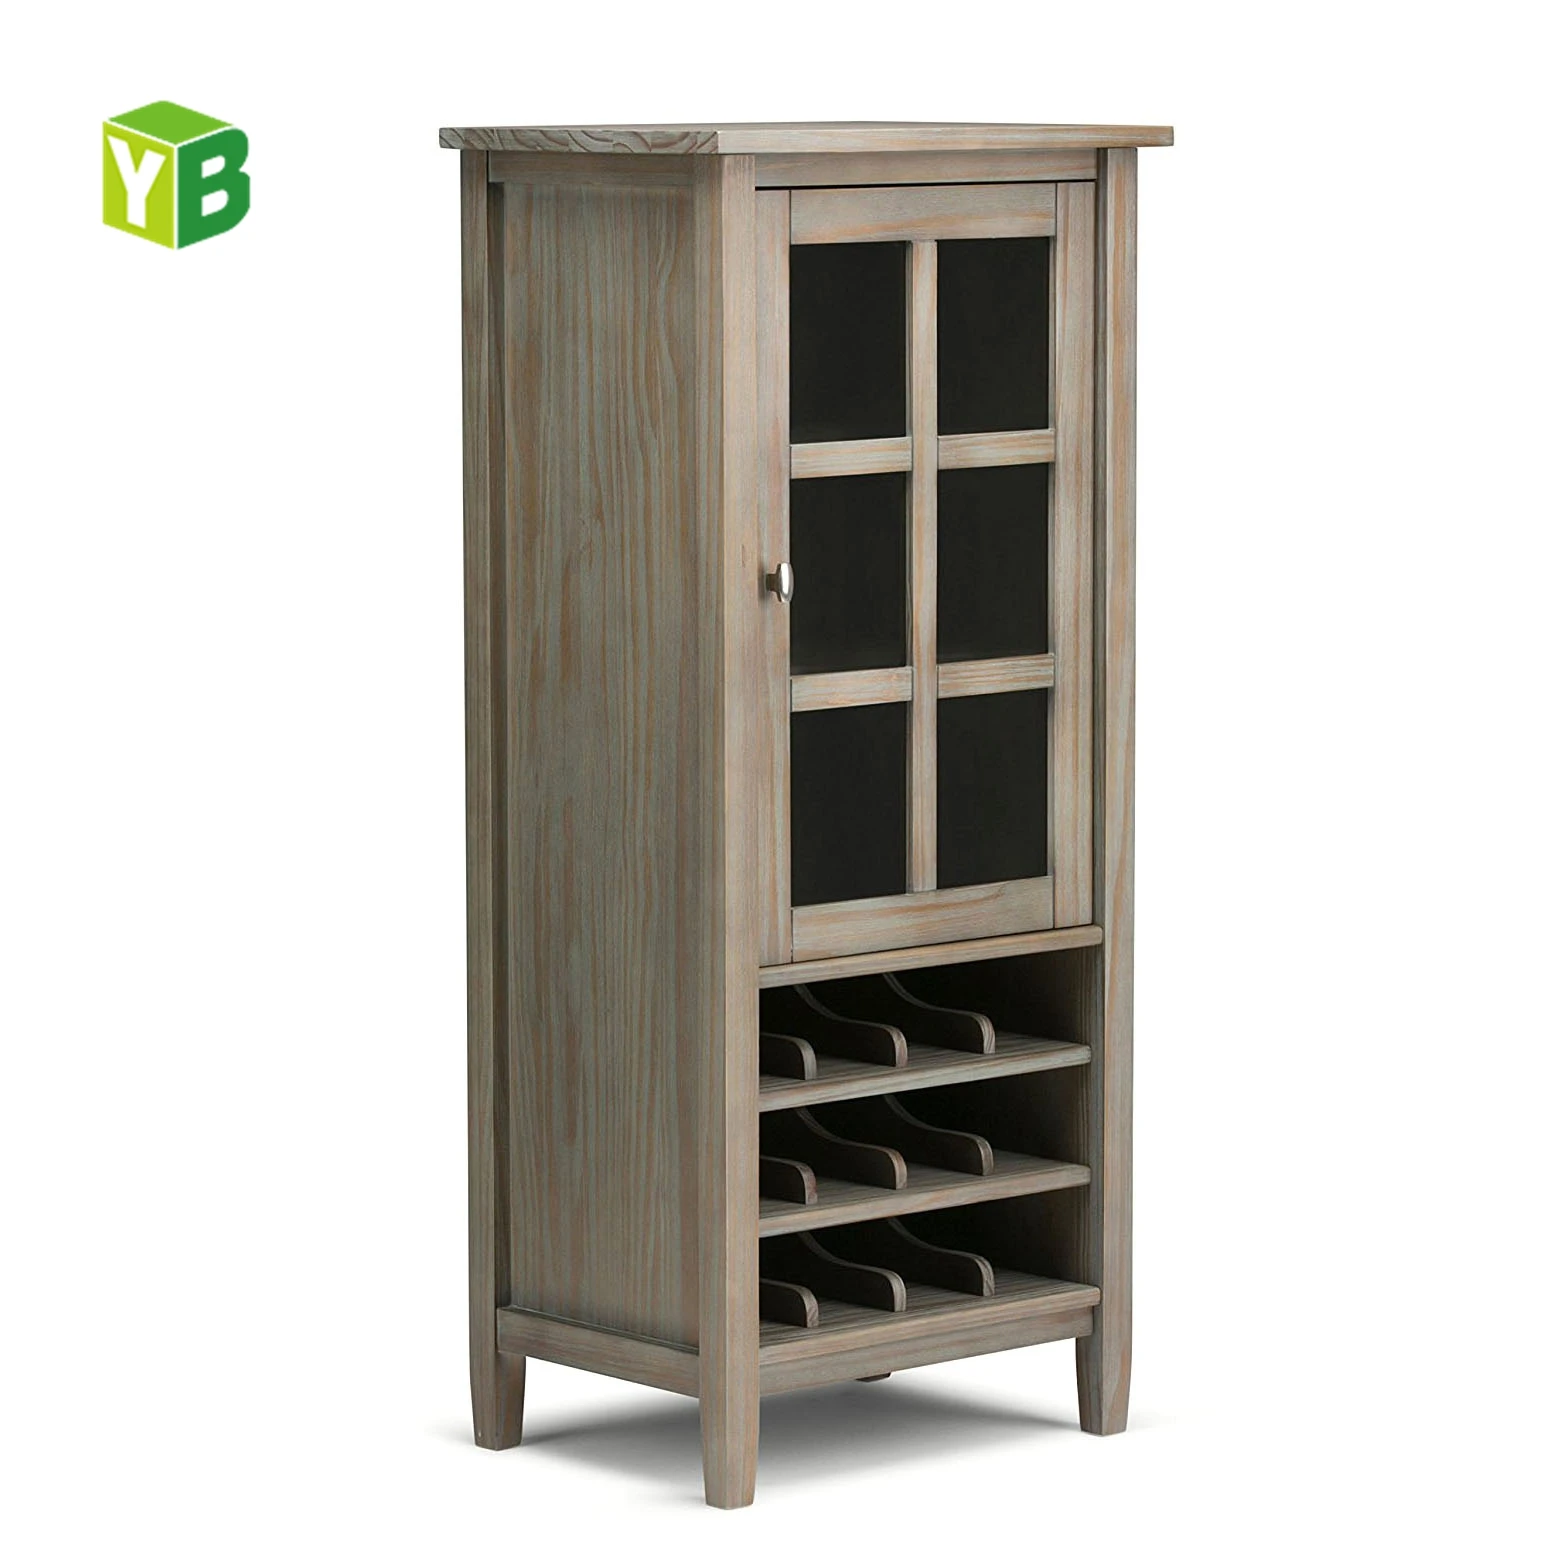 Wooden Whiskey Display Whisky Cabinet Buy Whisky Cabinet Whiskey